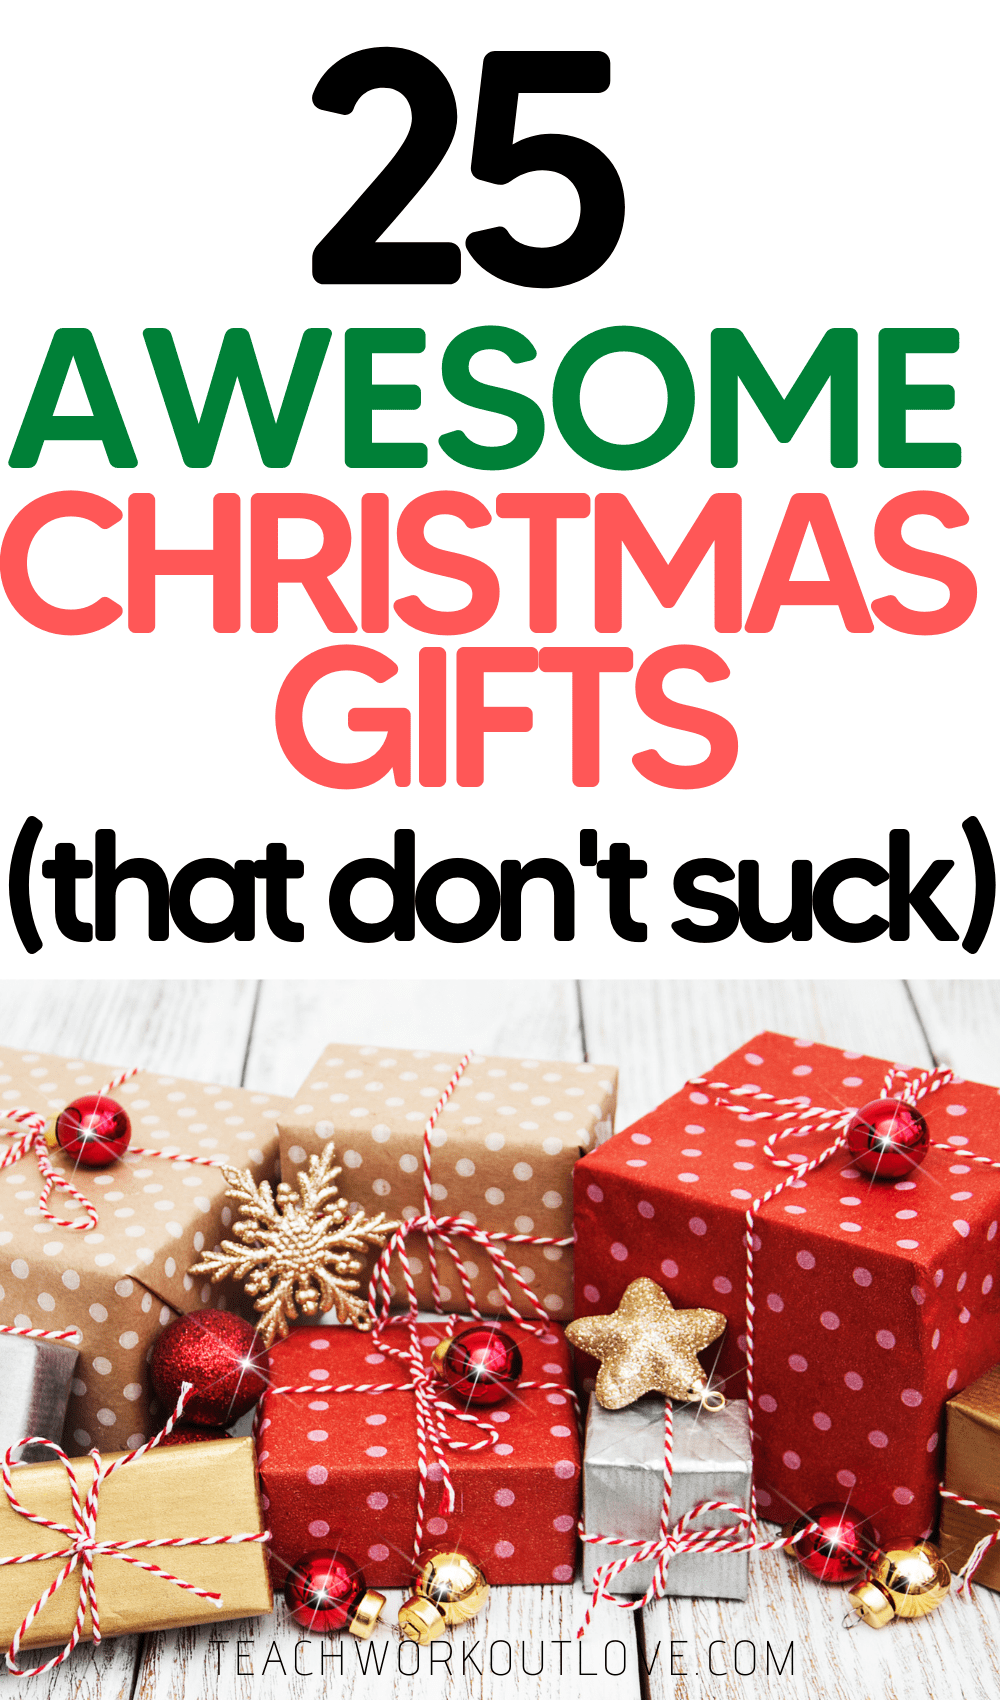 Every year we have no idea what to get our loved ones for Christmas. So we made a list of some awesome Christmas gifts that rock.